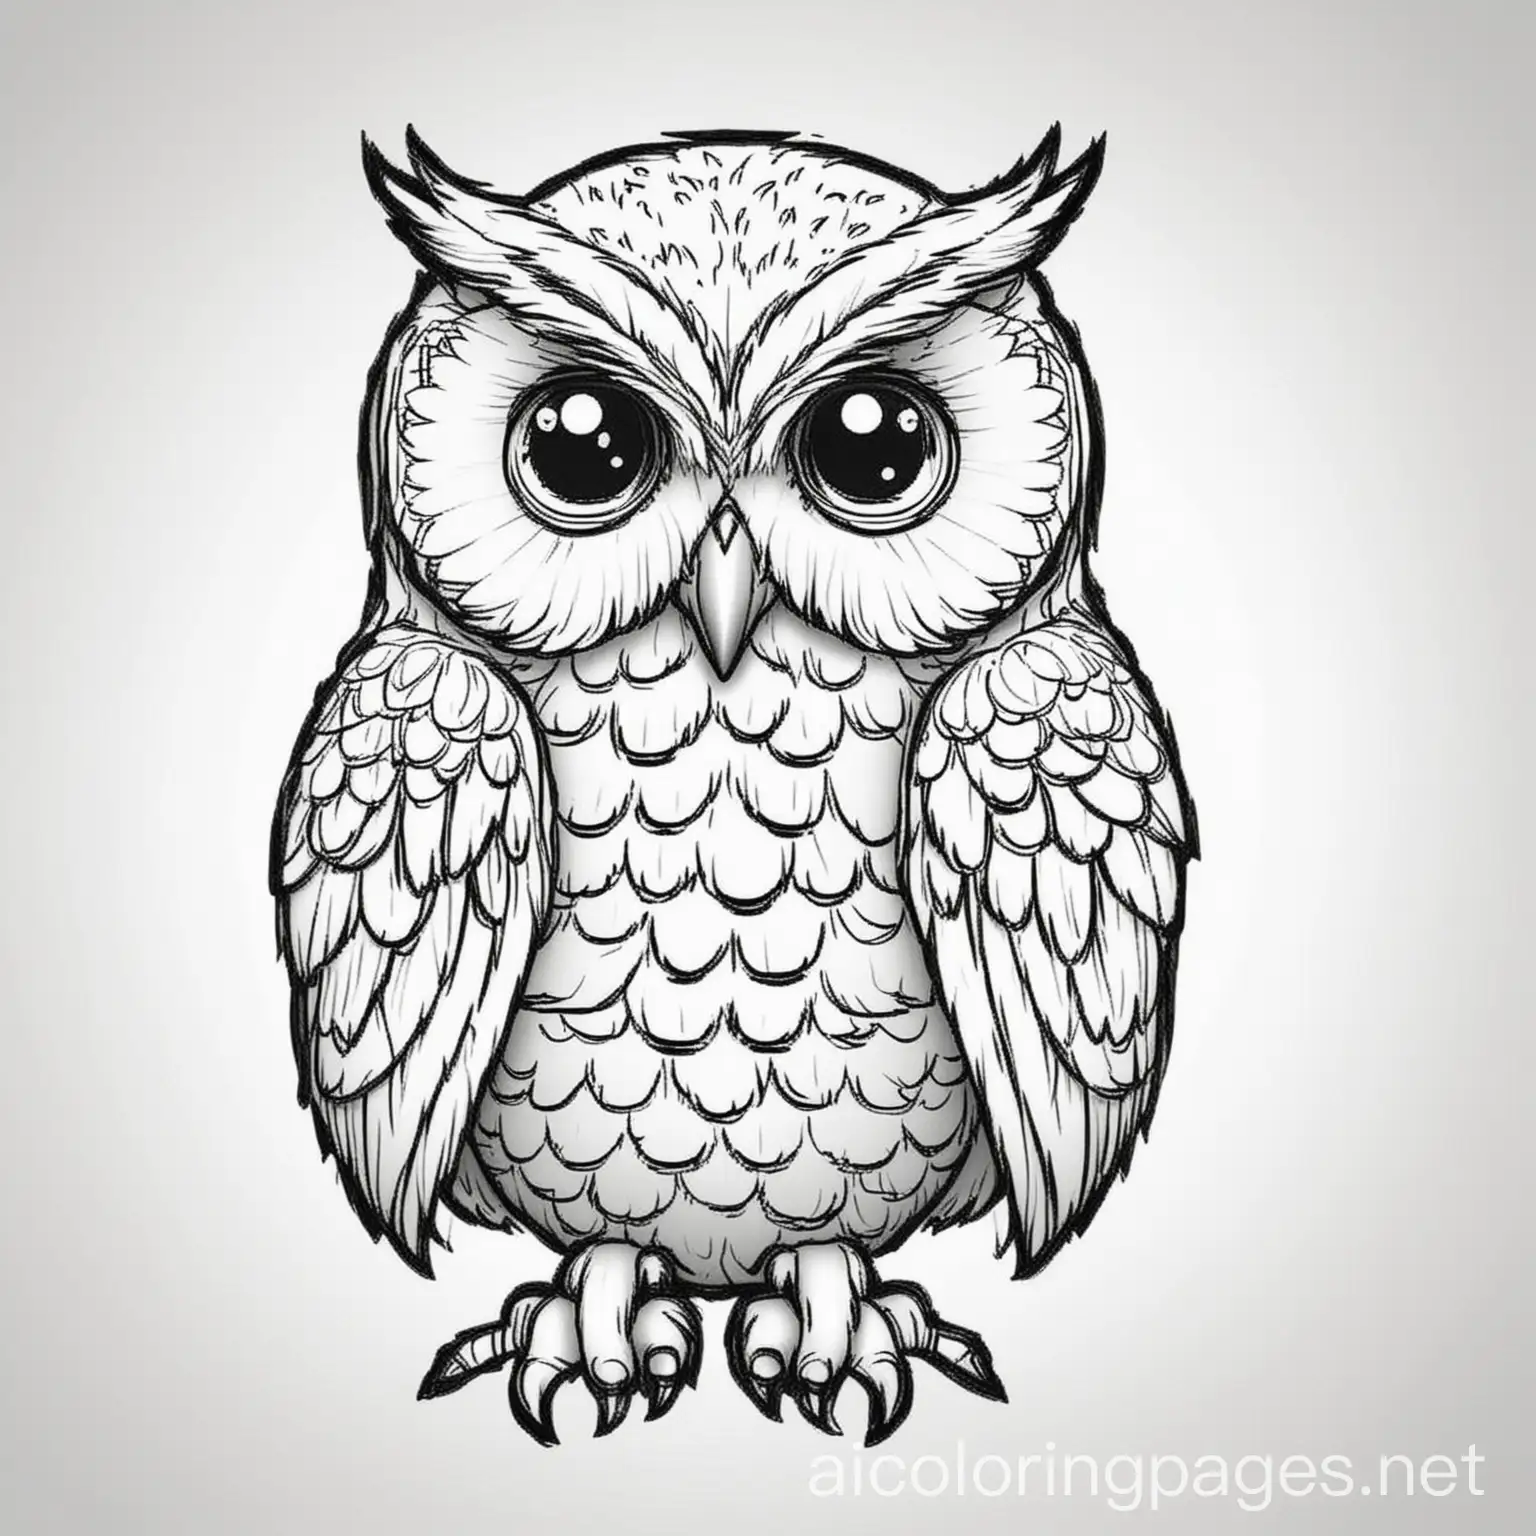 Simple-Owl-Coloring-Page-with-Ample-White-Space